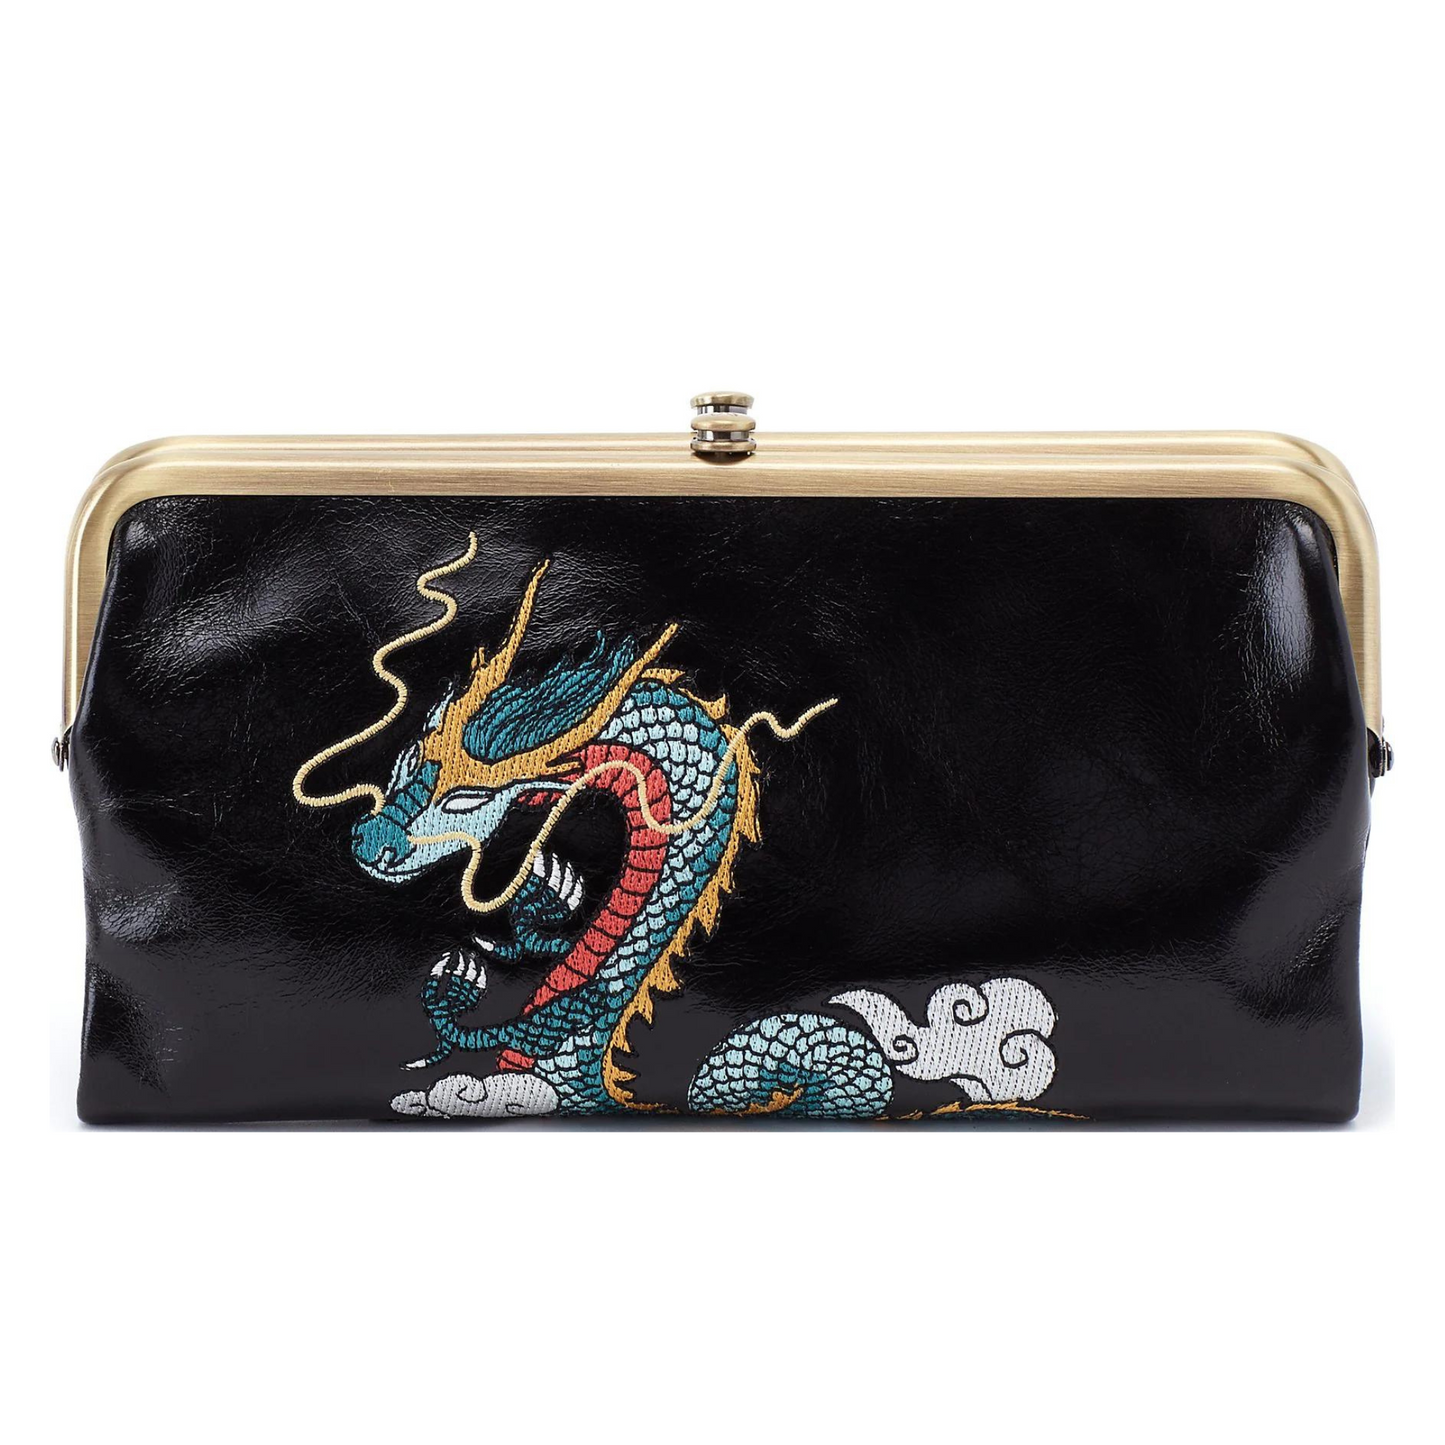 A black leather wallet with a dagon design.